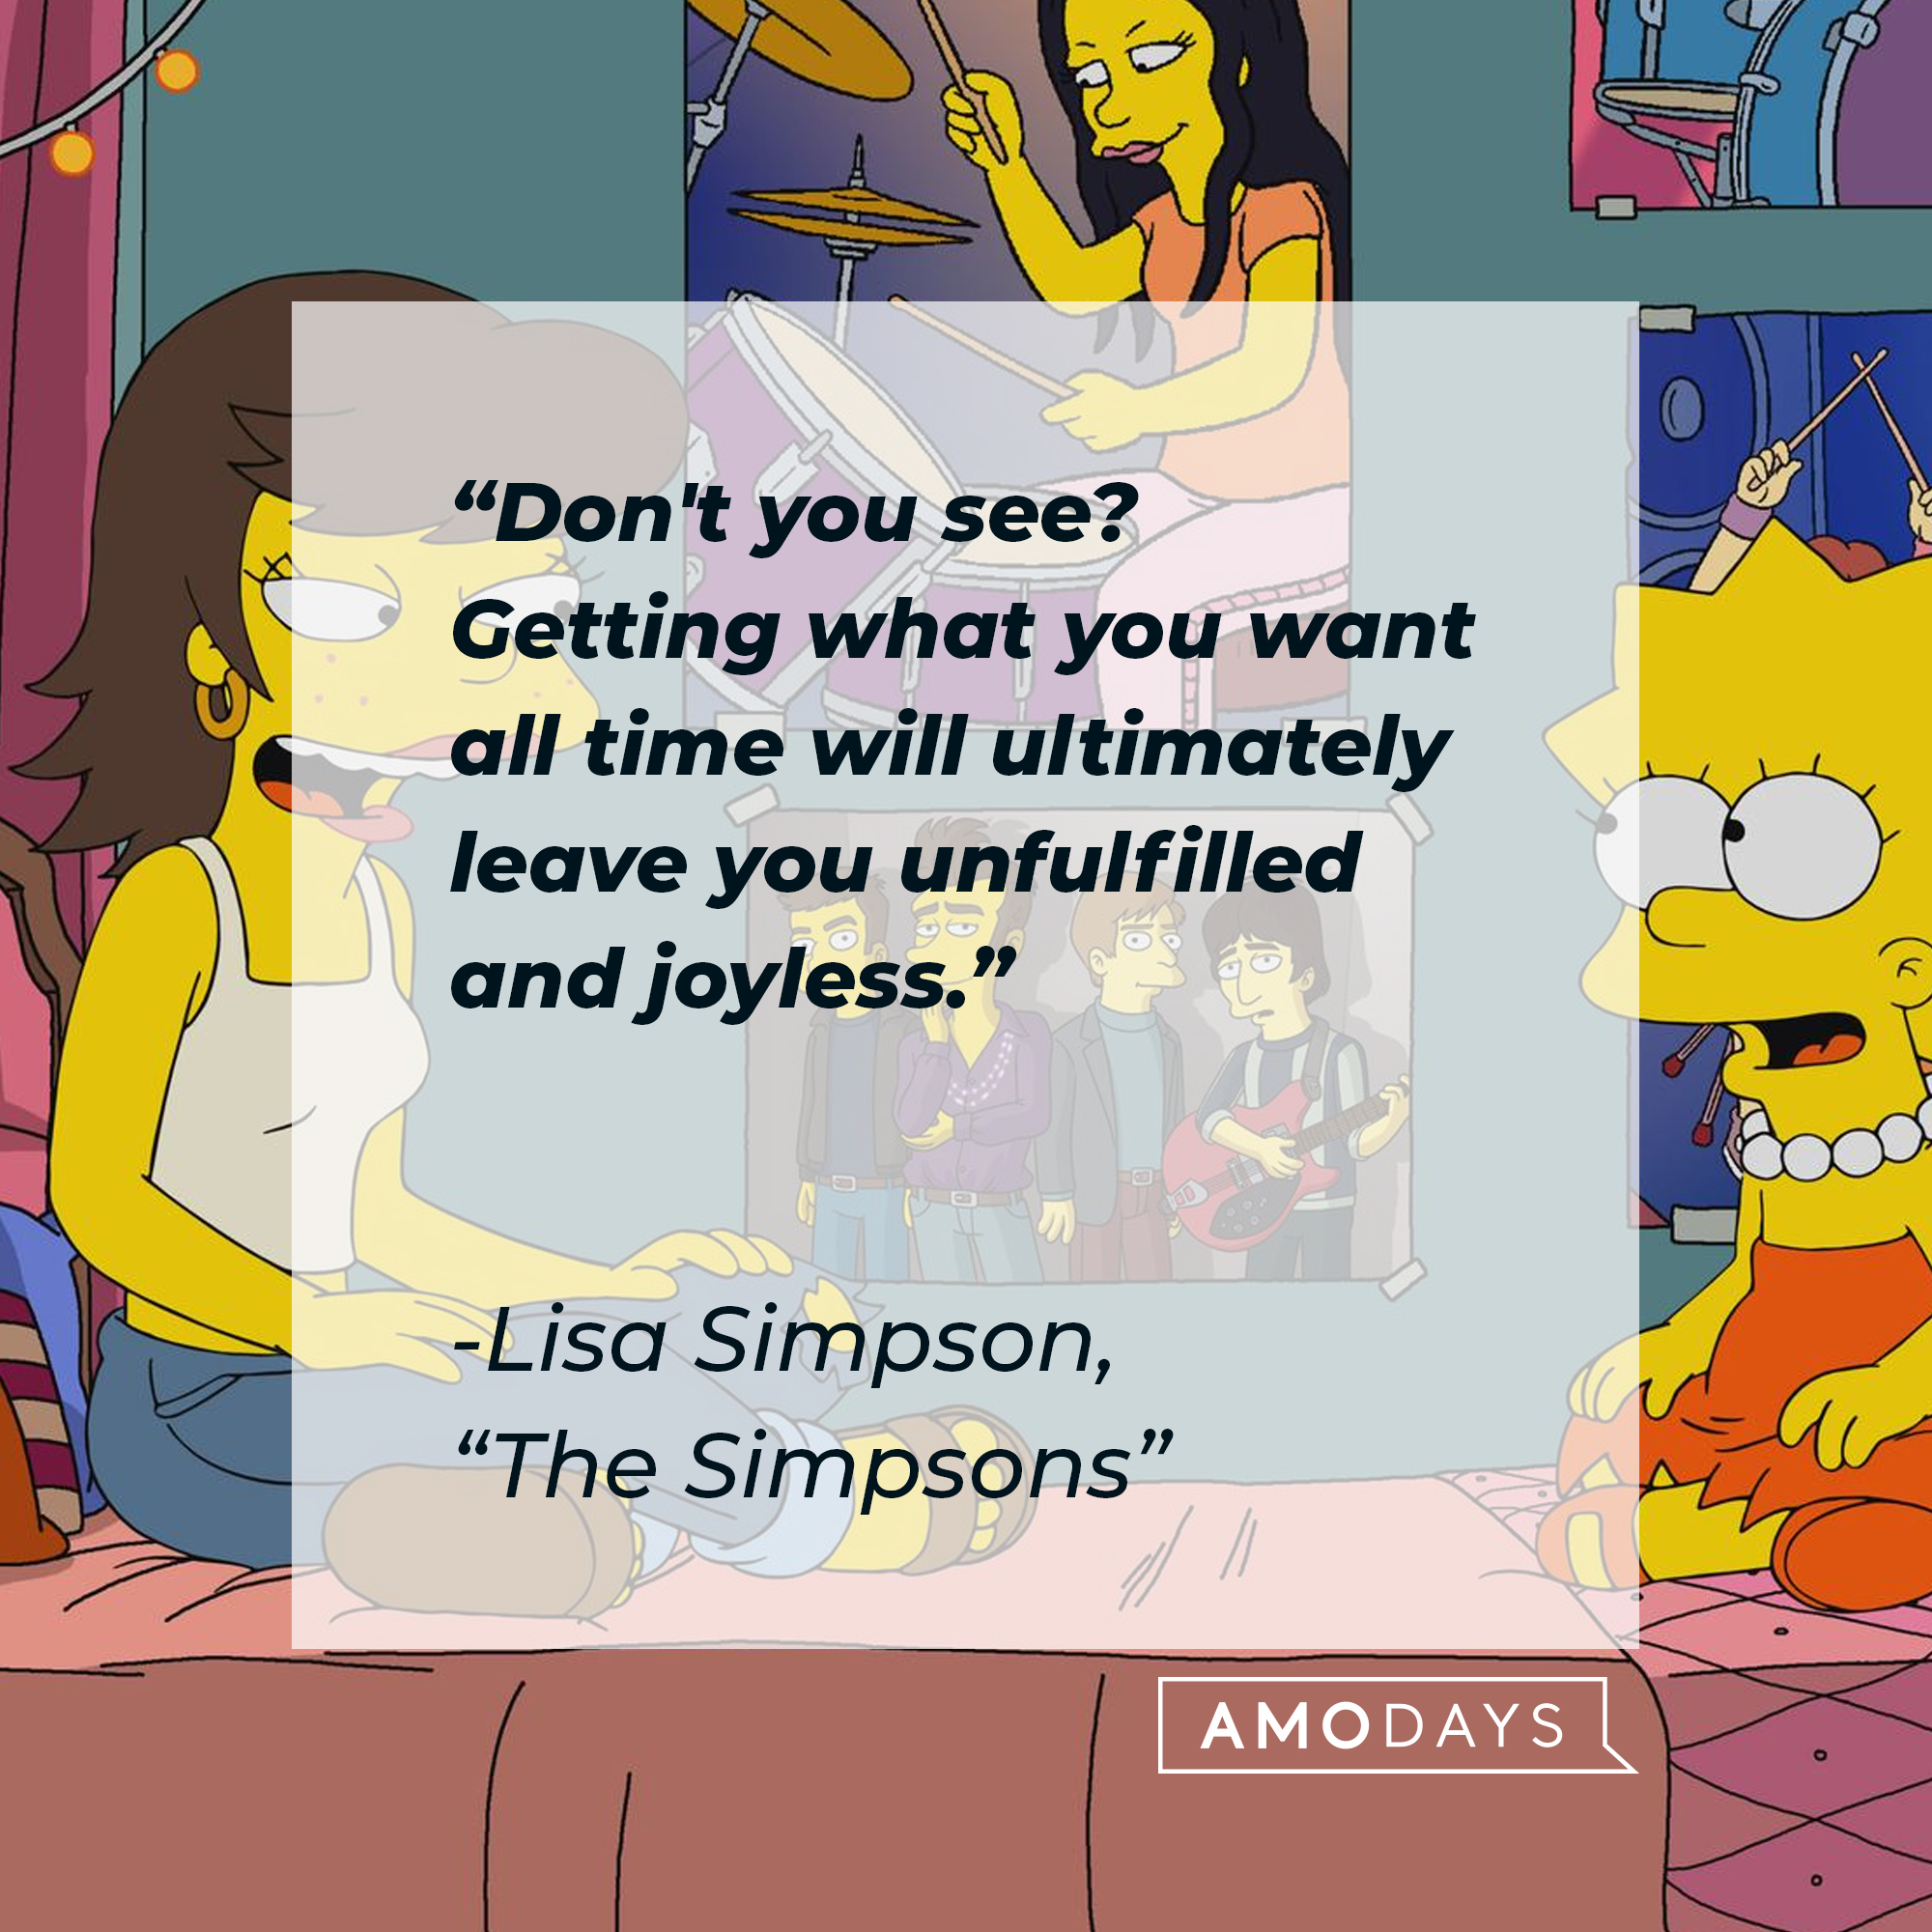 Lisa Simpson with her quote: “Don't you see? Getting what you want all time will ultimately leave you unfulfilled and joyless.” | Source: Facebook.com/TheSimpsons